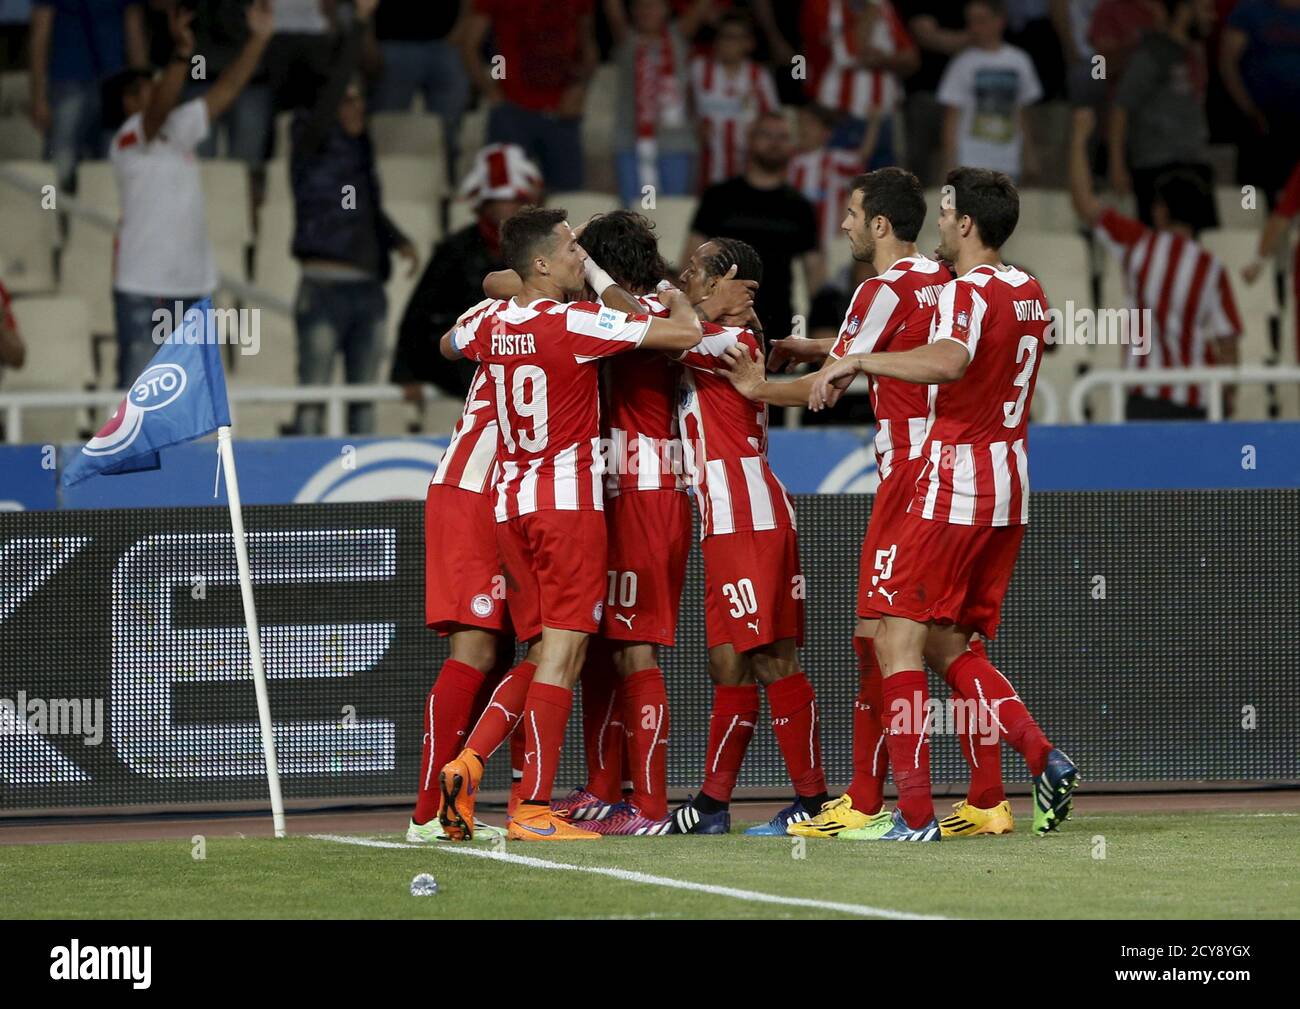 Insister assimilation elleve Olympiacos' players celebrate their goal against Skoda Xanthi during the  Greek Cup Final at the Olympic stadium in Athens, May 23, 2015.  REUTERS/Kostas Tsironis Stock Photo - Alamy